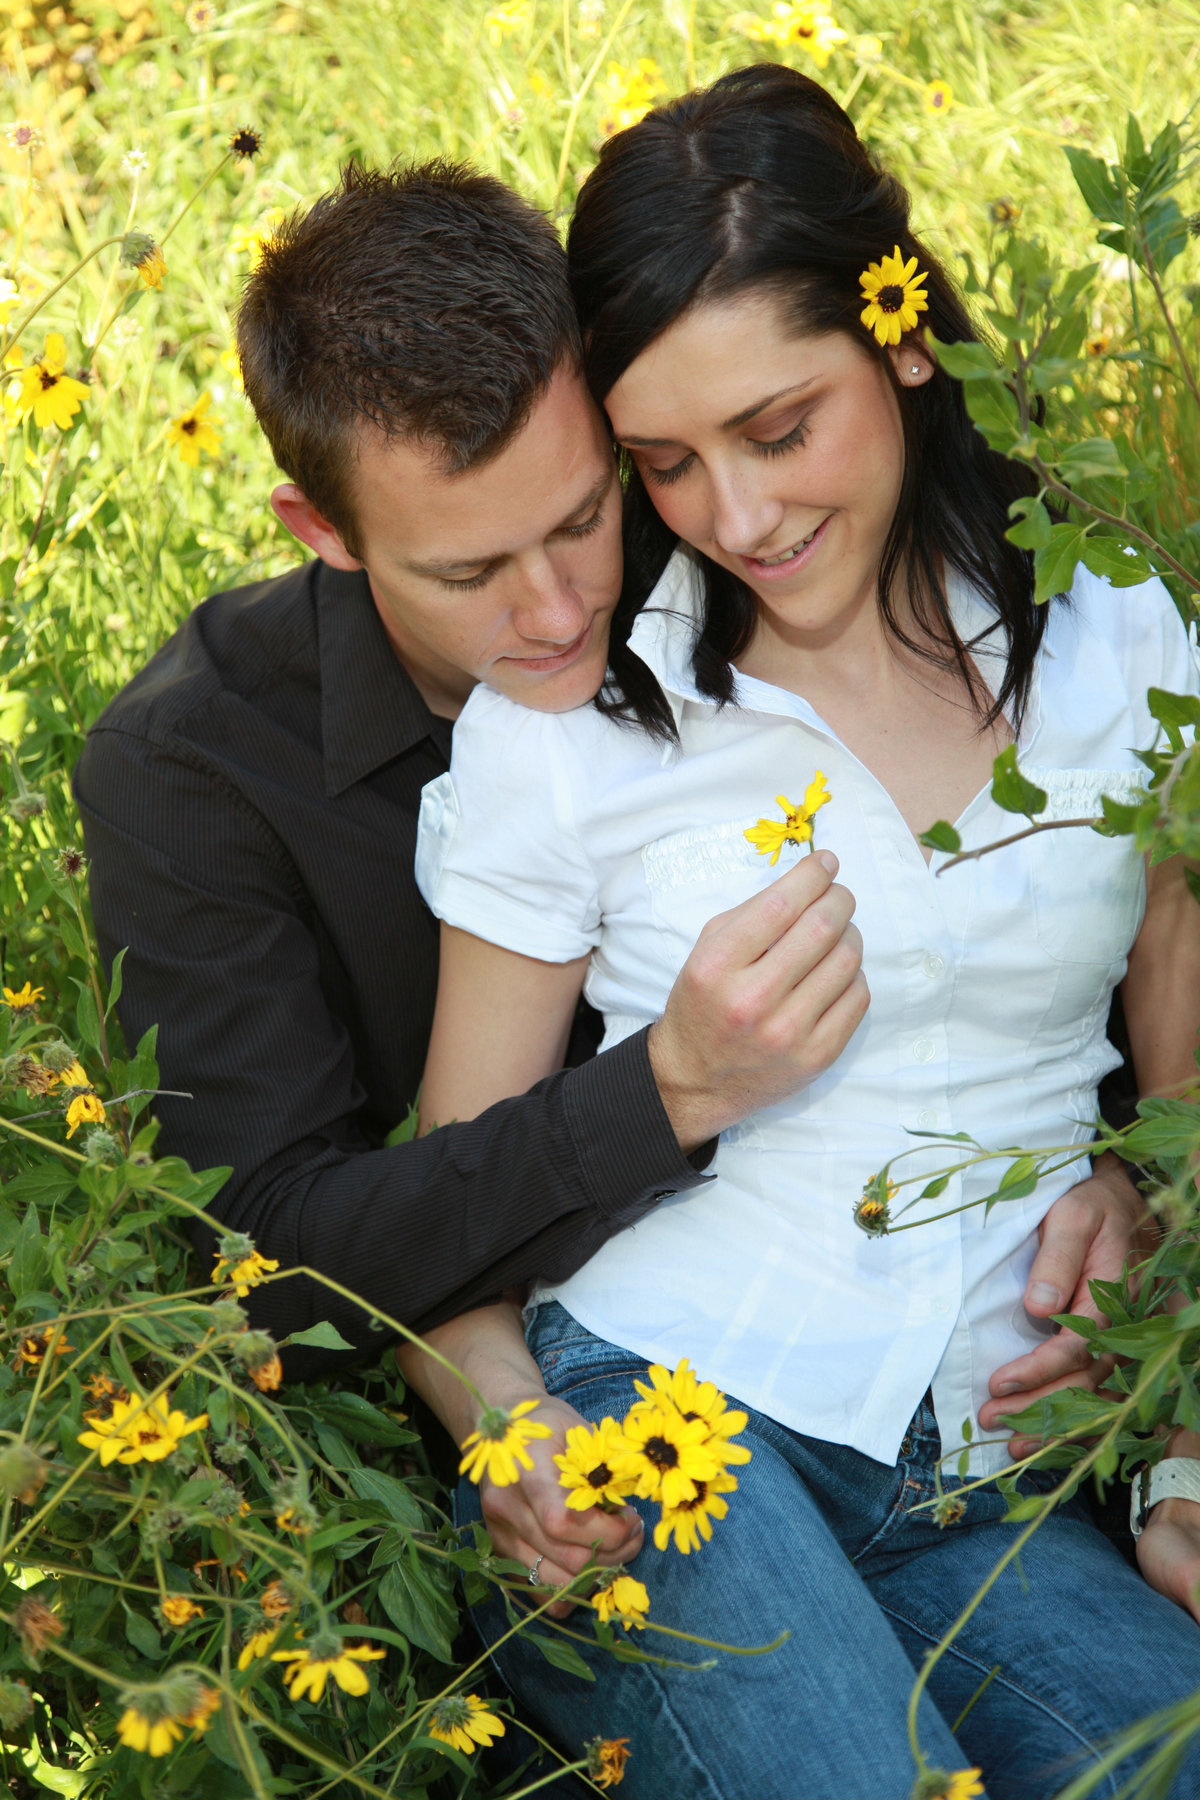 Engagement photos by Kassel Photography. Weddings,events,models,portraits and family photography. Located in Orange County,California. Private studio with over 16 years experience. Professional,fast,fun and creative. Kassel